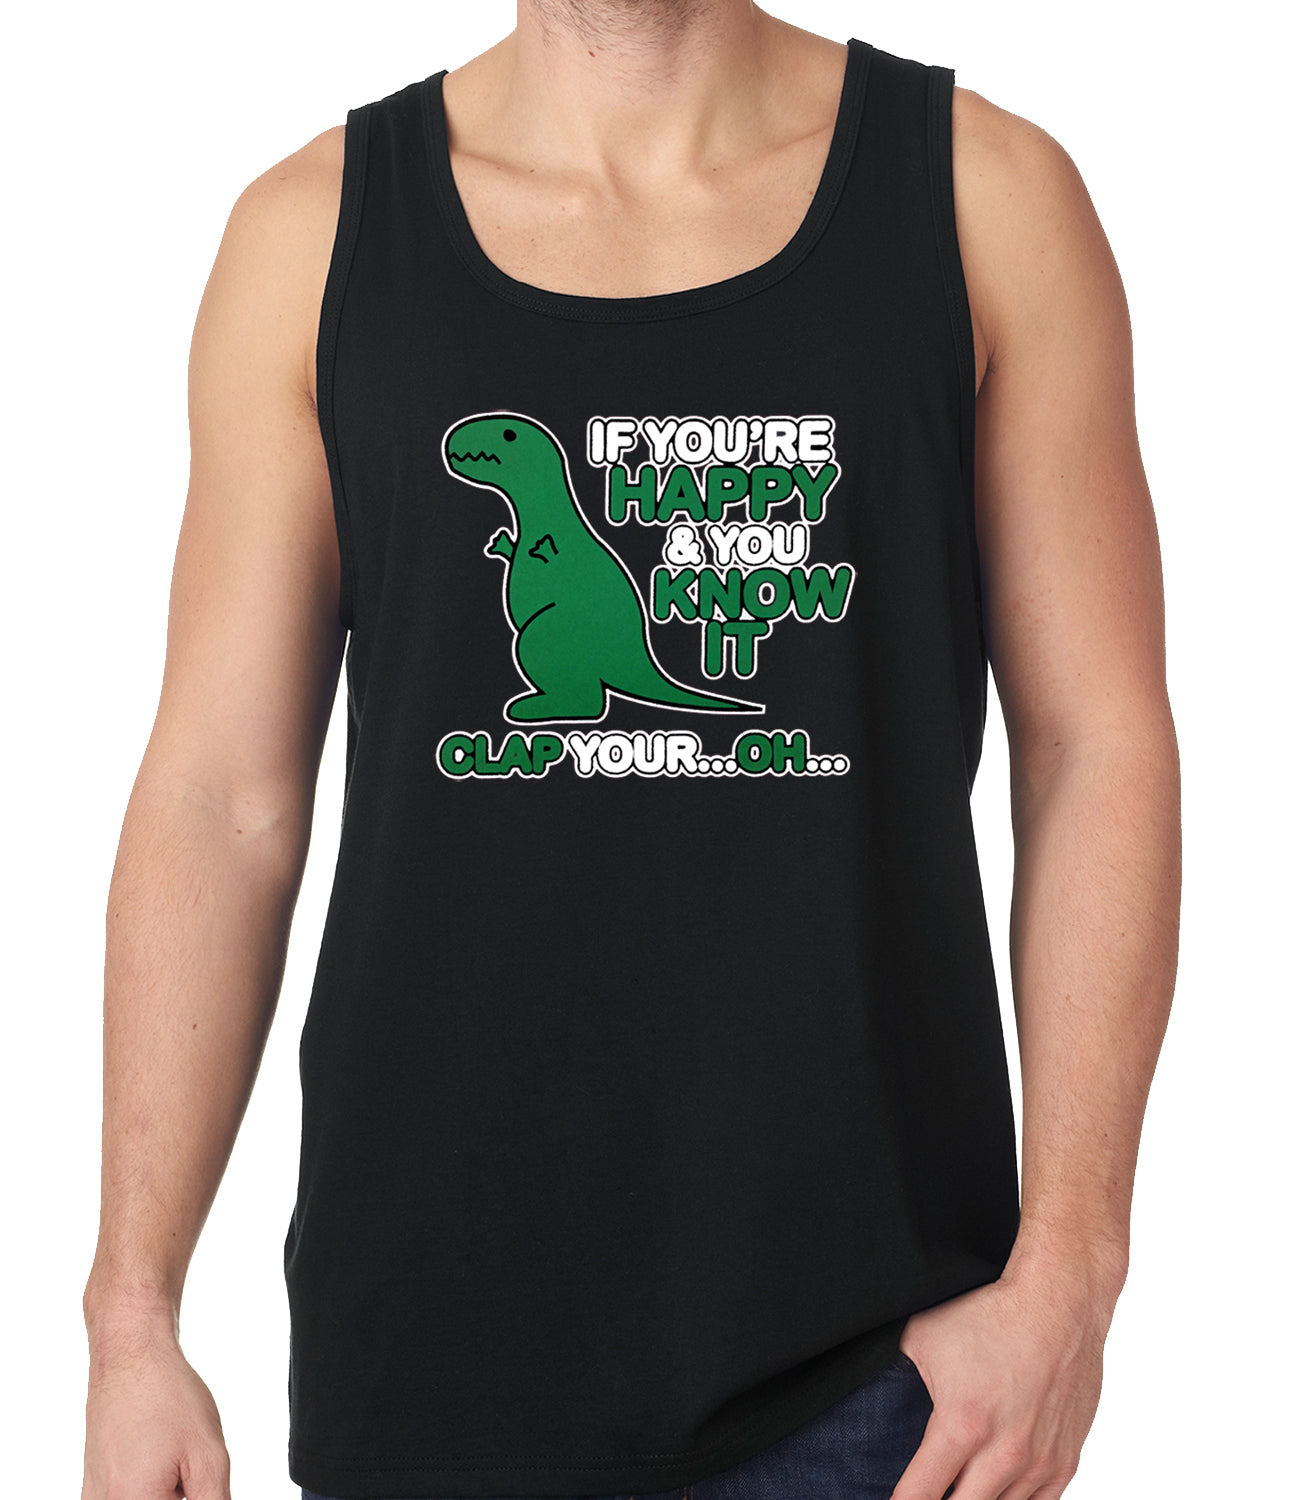 If You're Happy & You Know it Clap Your OH T-Rex Tank Top